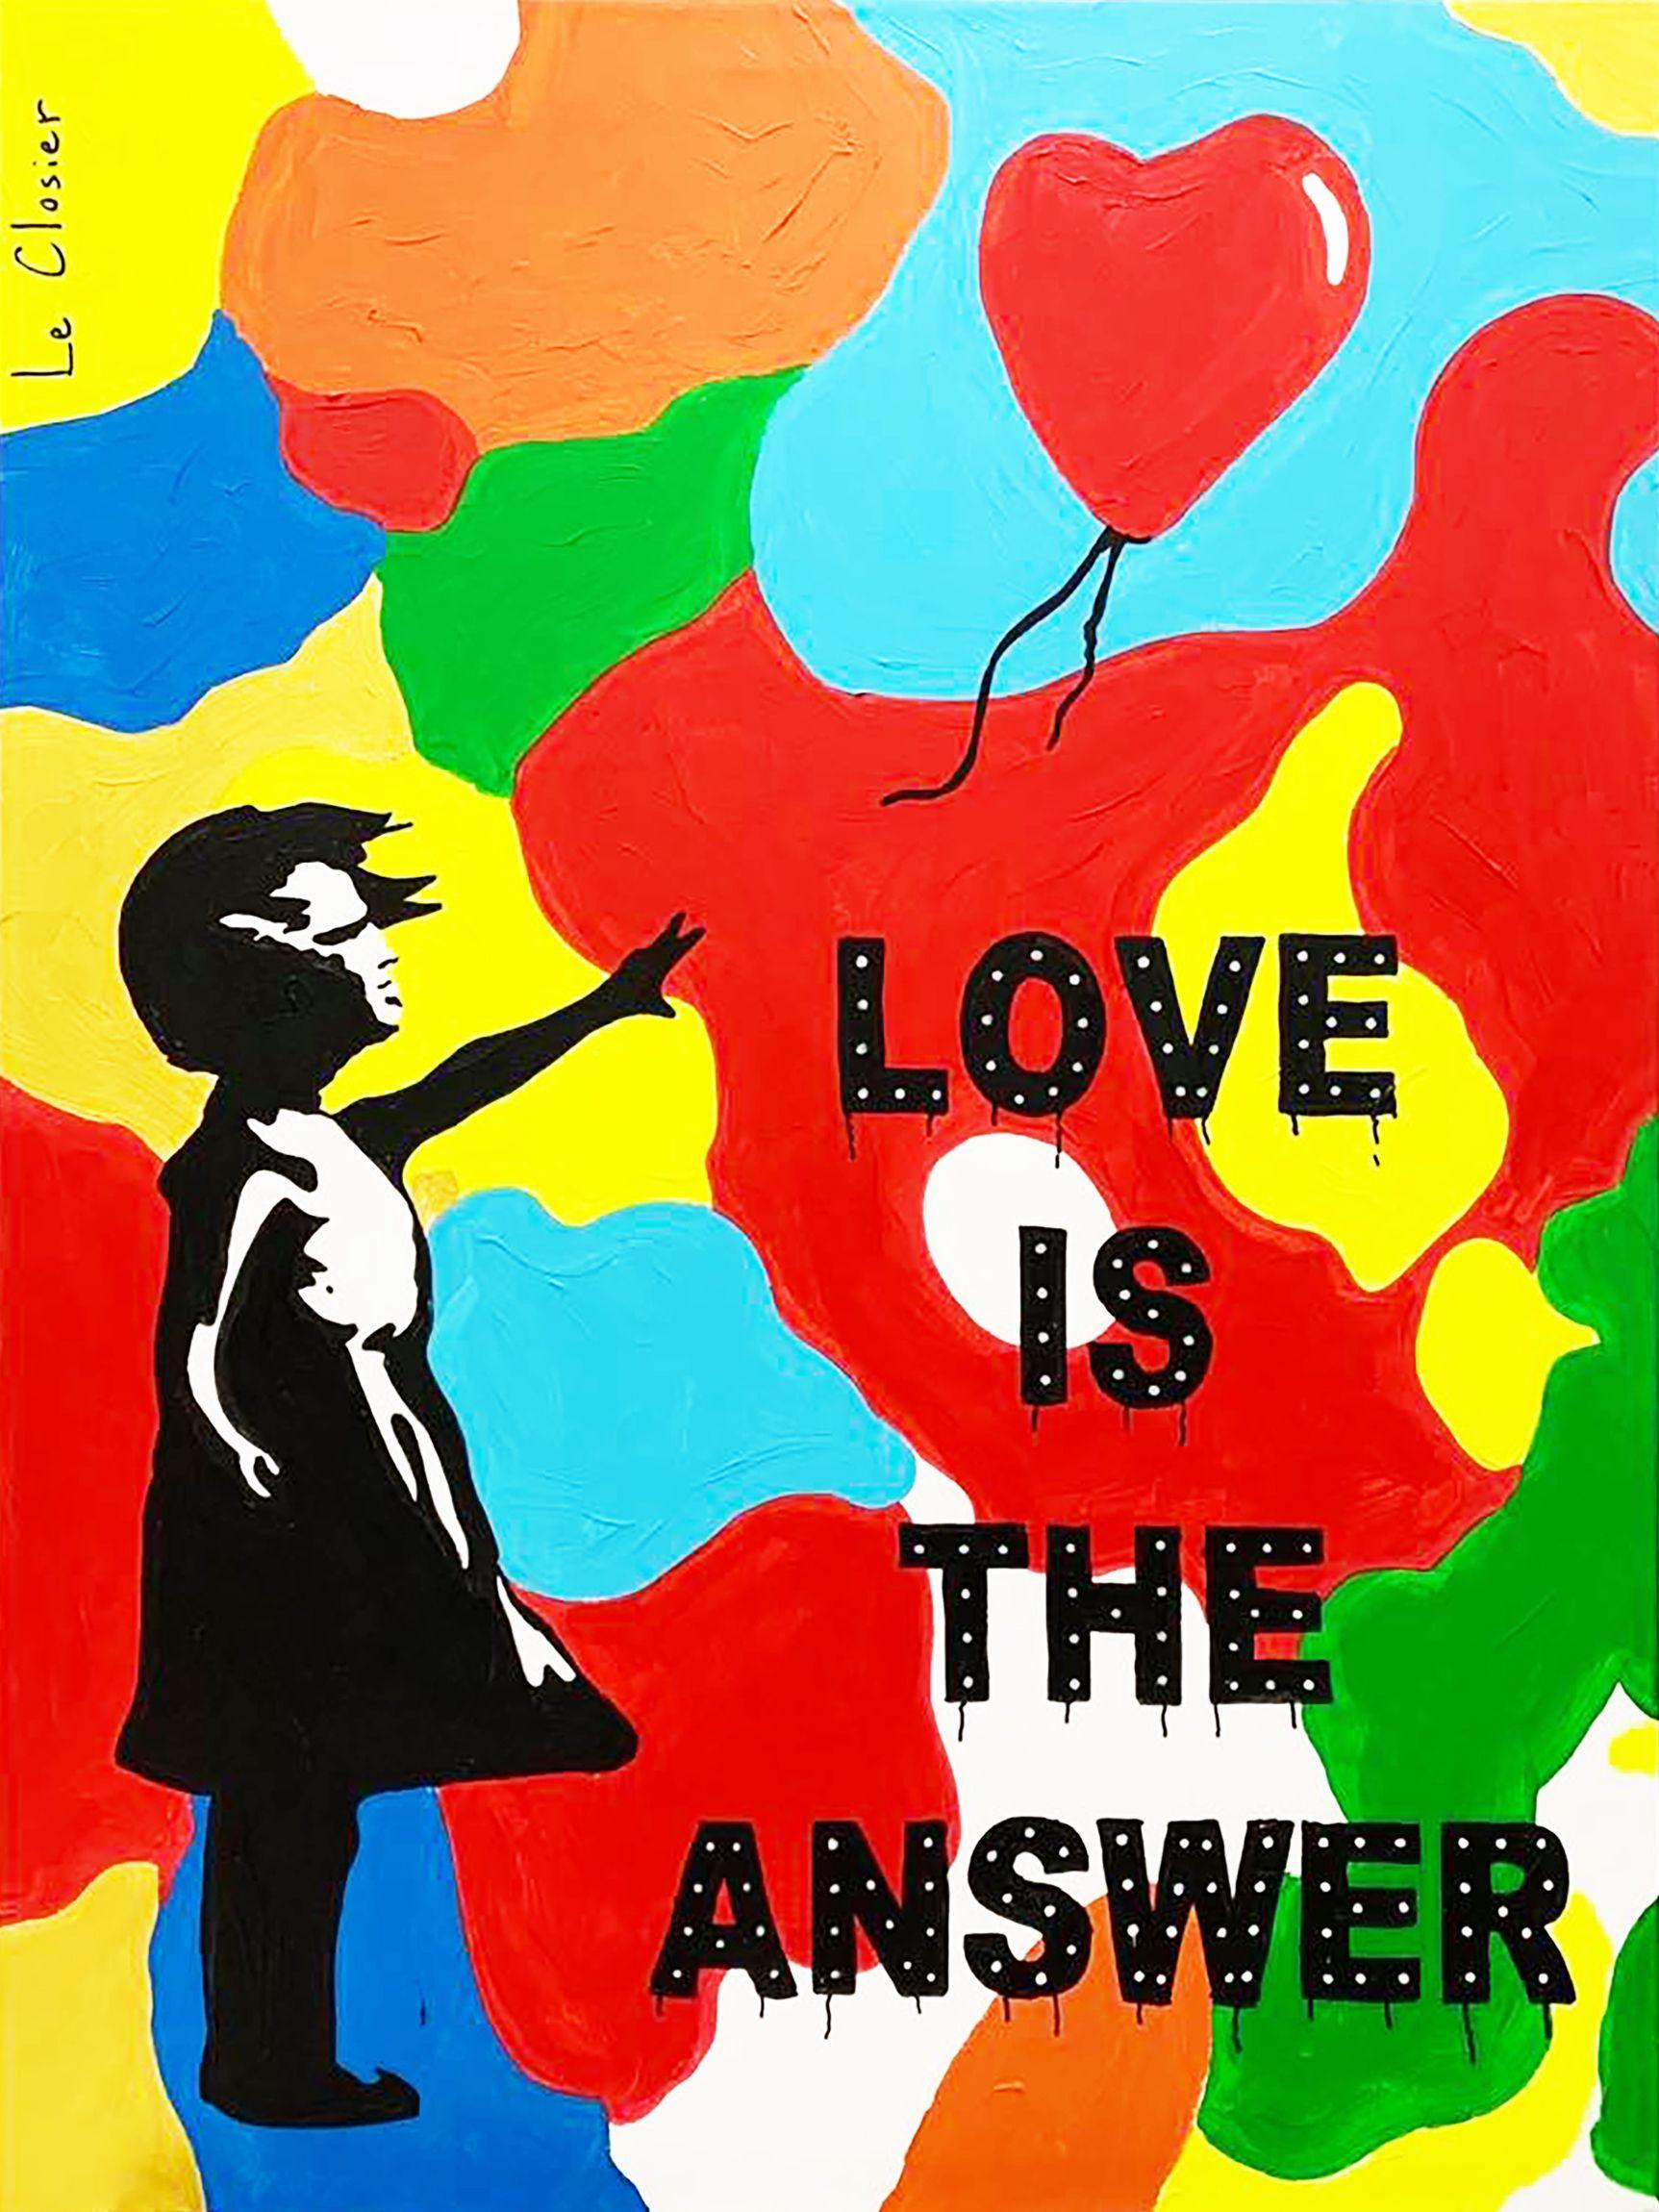 LOVE IS THE ANSWER  Homage to street artist BANKSY.  Acrylic and spray paint on canvas.  30in x 40in (76cm x 101cm).  Ready to hang. :: Painting :: Pop-Art :: This piece comes with an official certificate of authenticity signed by the artist ::